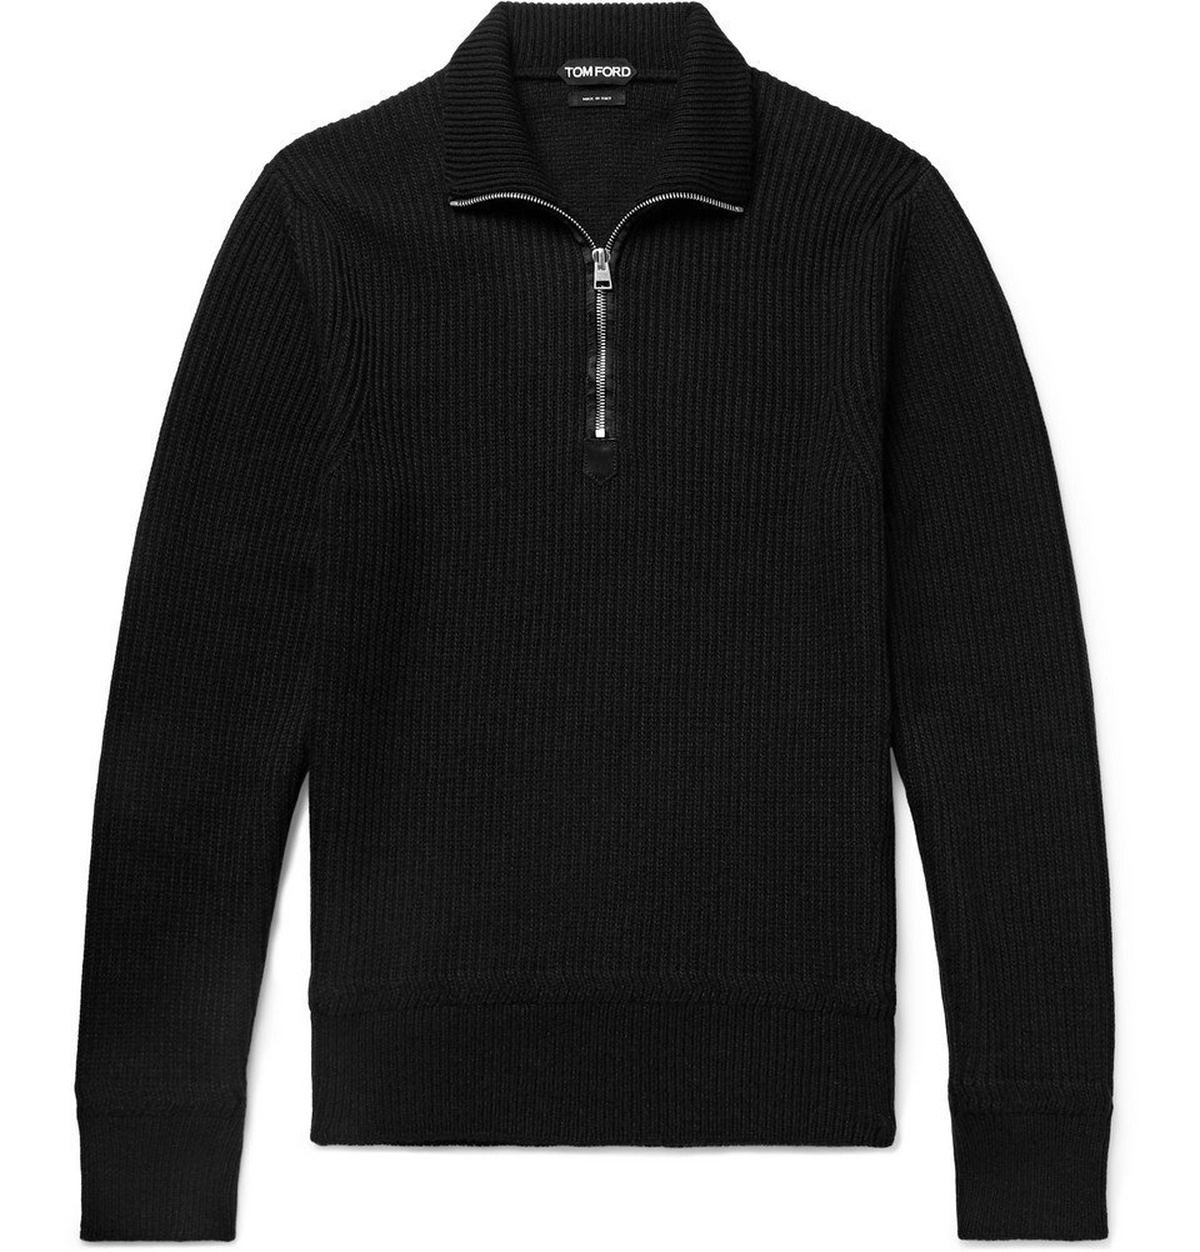 TOM FORD - Slim-Fit Ribbed Merino Wool and Cashmere-Blend Half-Zip ...